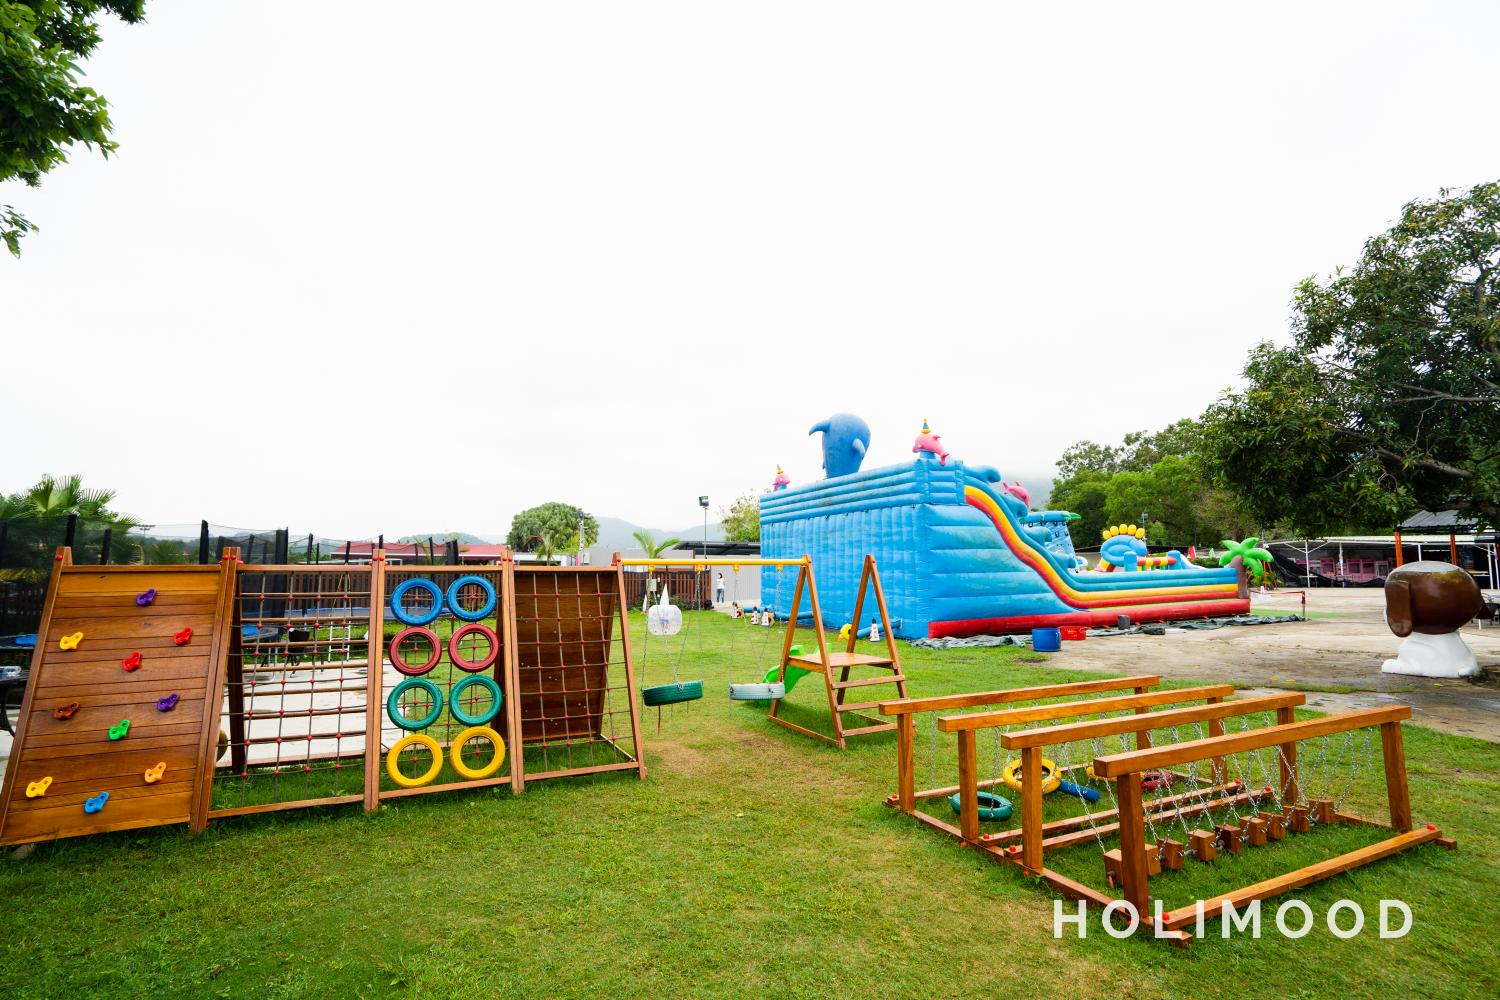 Hung Wan BBQ | HungWan Camp 【Limited Offer】5 Hour Seaview BBQ Buffet & Activities Package (VIP Room/ Playground) 25